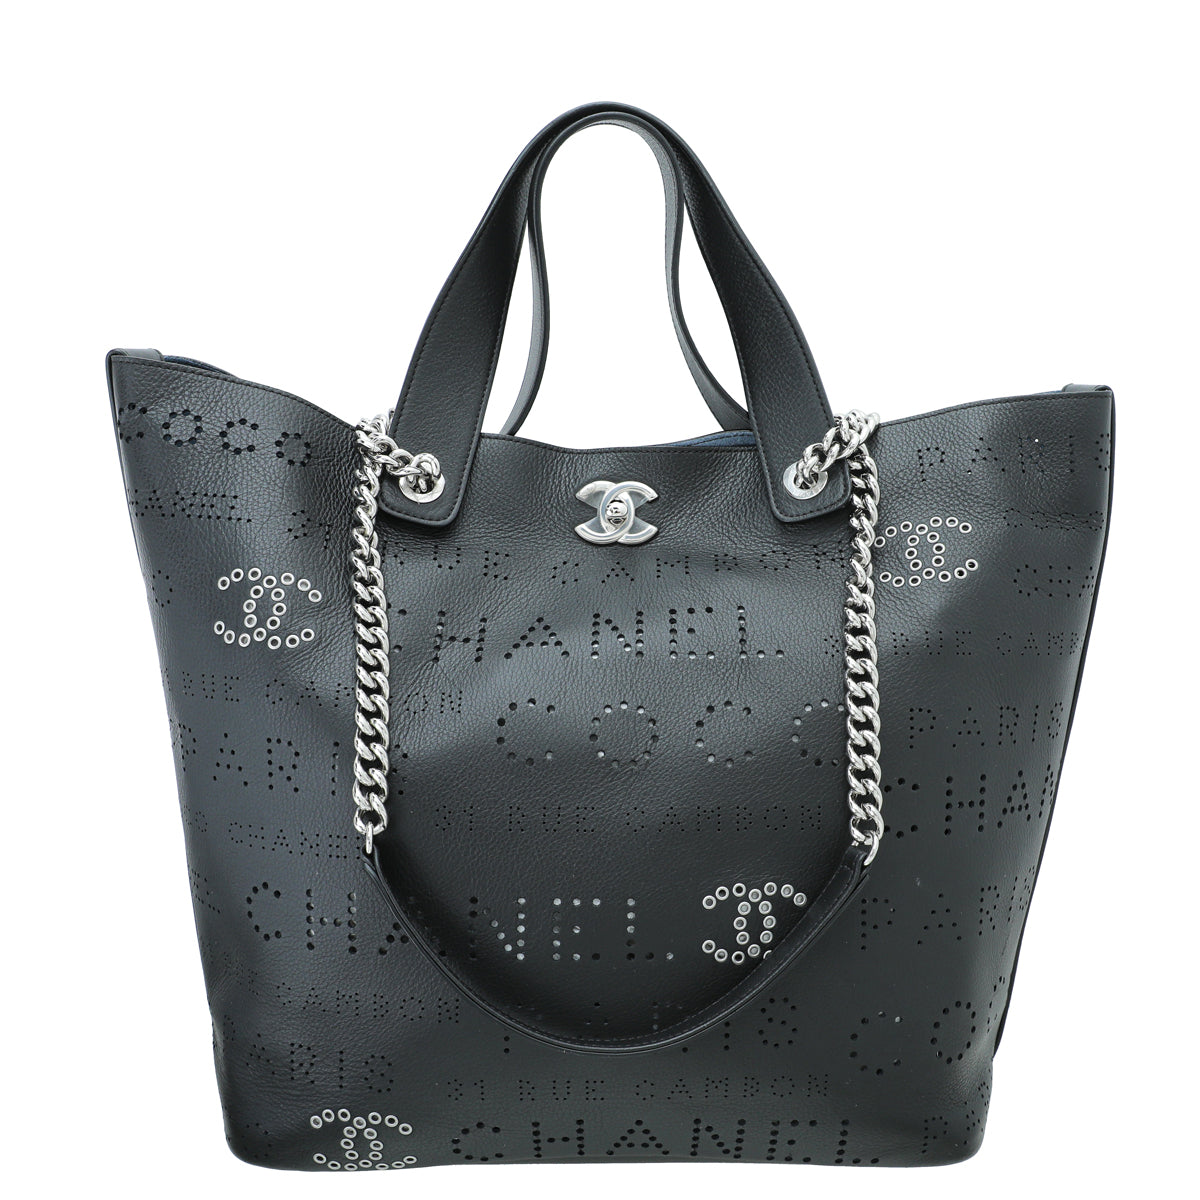 Shop CHANEL Small Shopping Bag (AS4437 B14351 94305) by